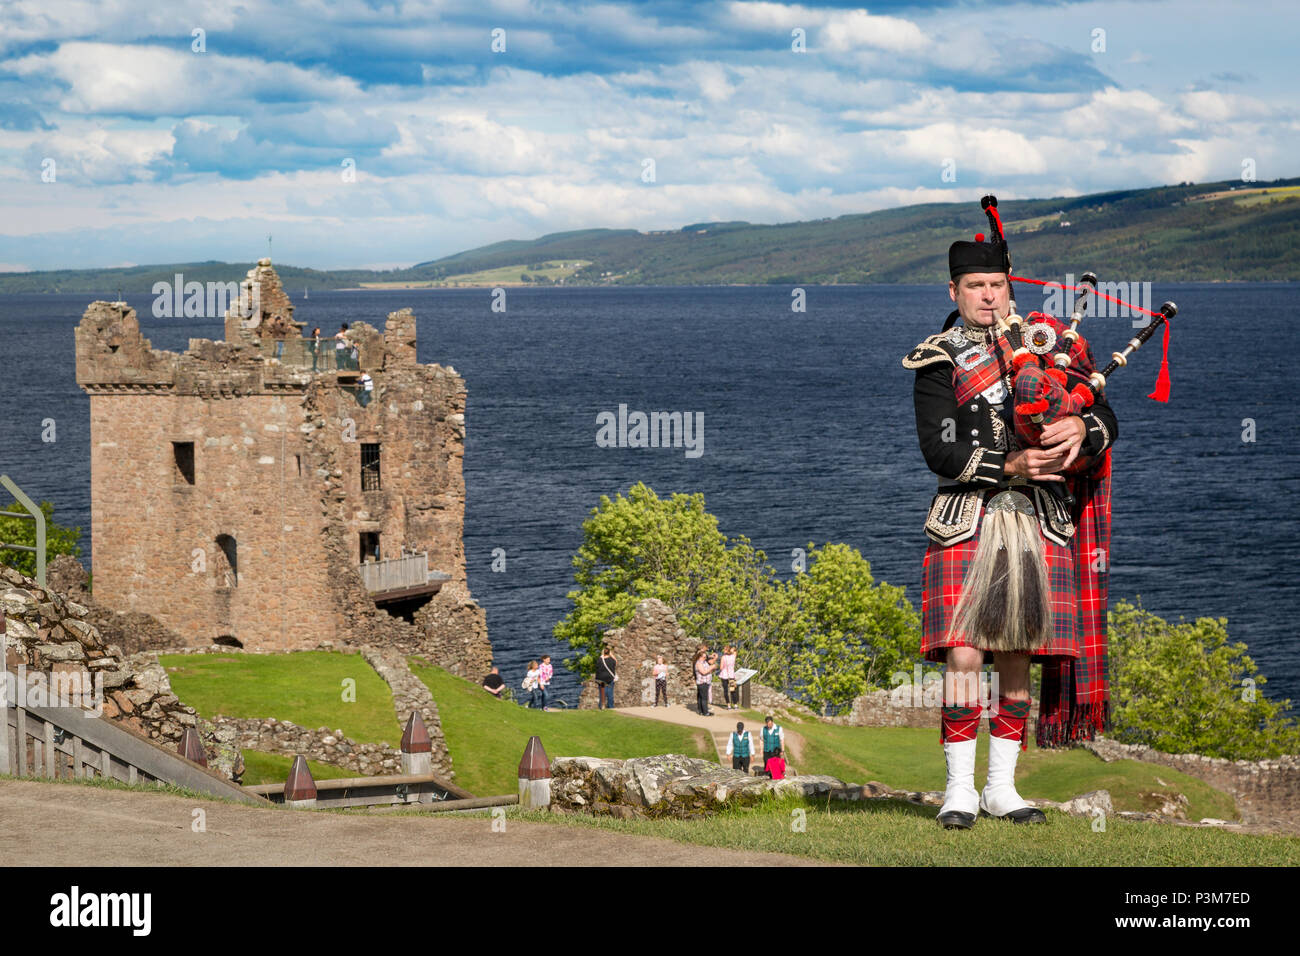 Bagpiper playing near the ruins of Urquhart Castle along the shores of Loch Ness, Highlands, Scotland, UK Stock Photo